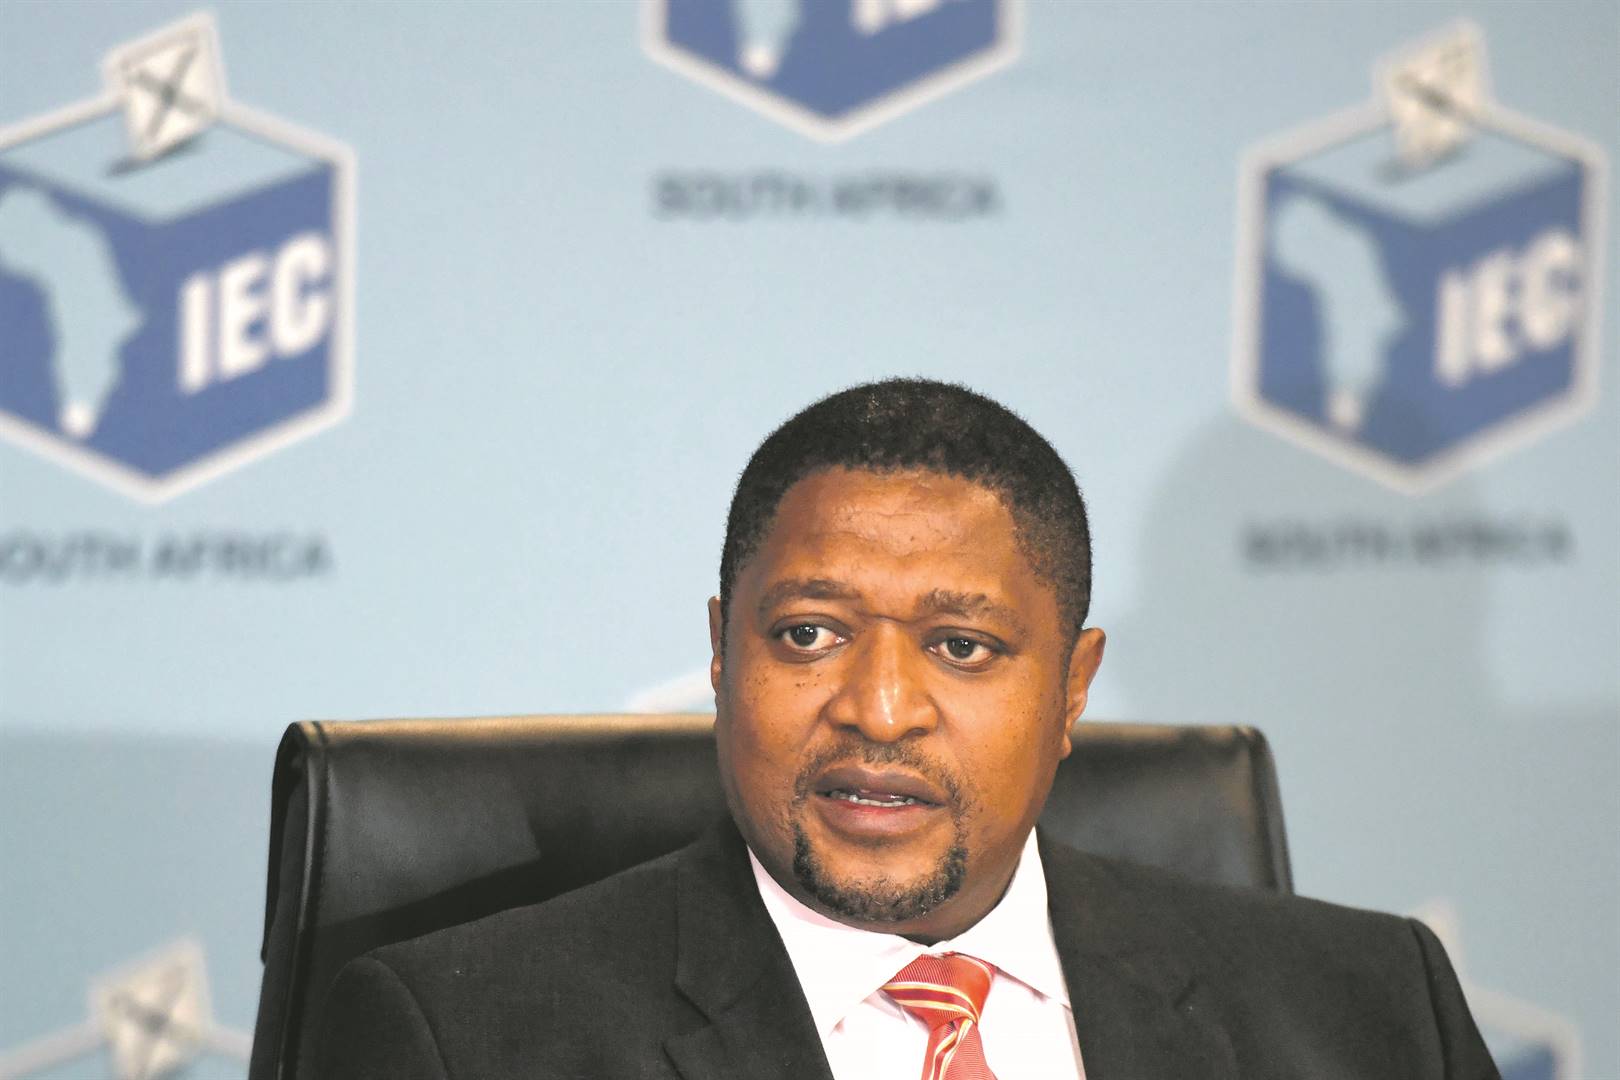 The IEC's chairperson, Glen Mashinini, has been dragged into the controversy over an ANC Women's League's elective conference at the Durban International Convention Centre.